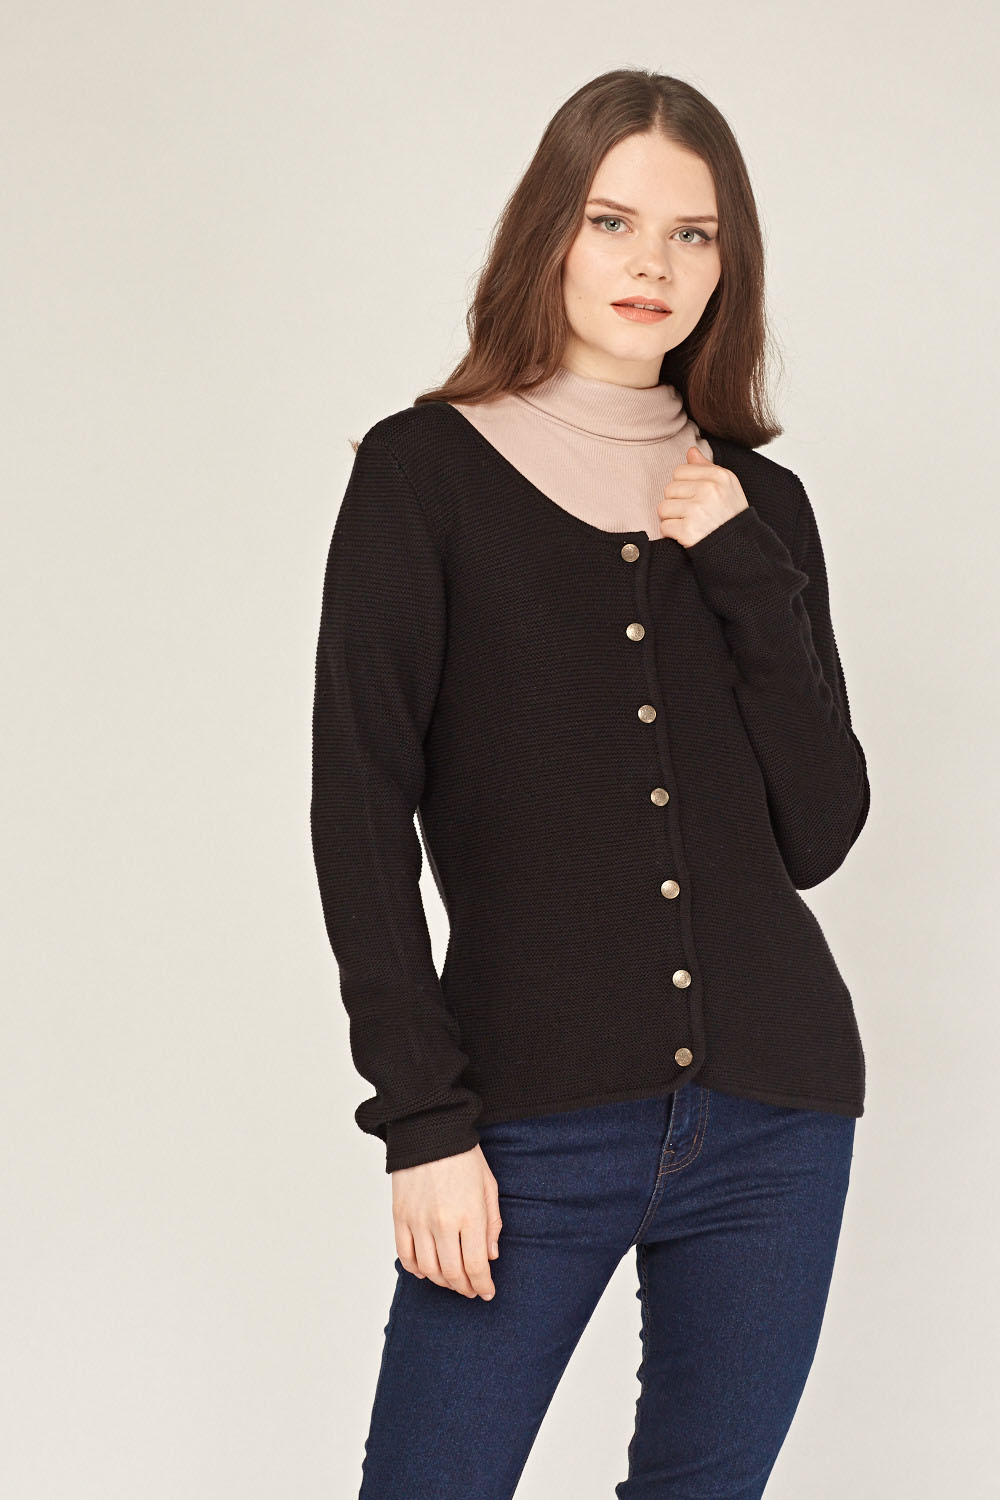 Crew Neck Button Up Cardigan - Just $3